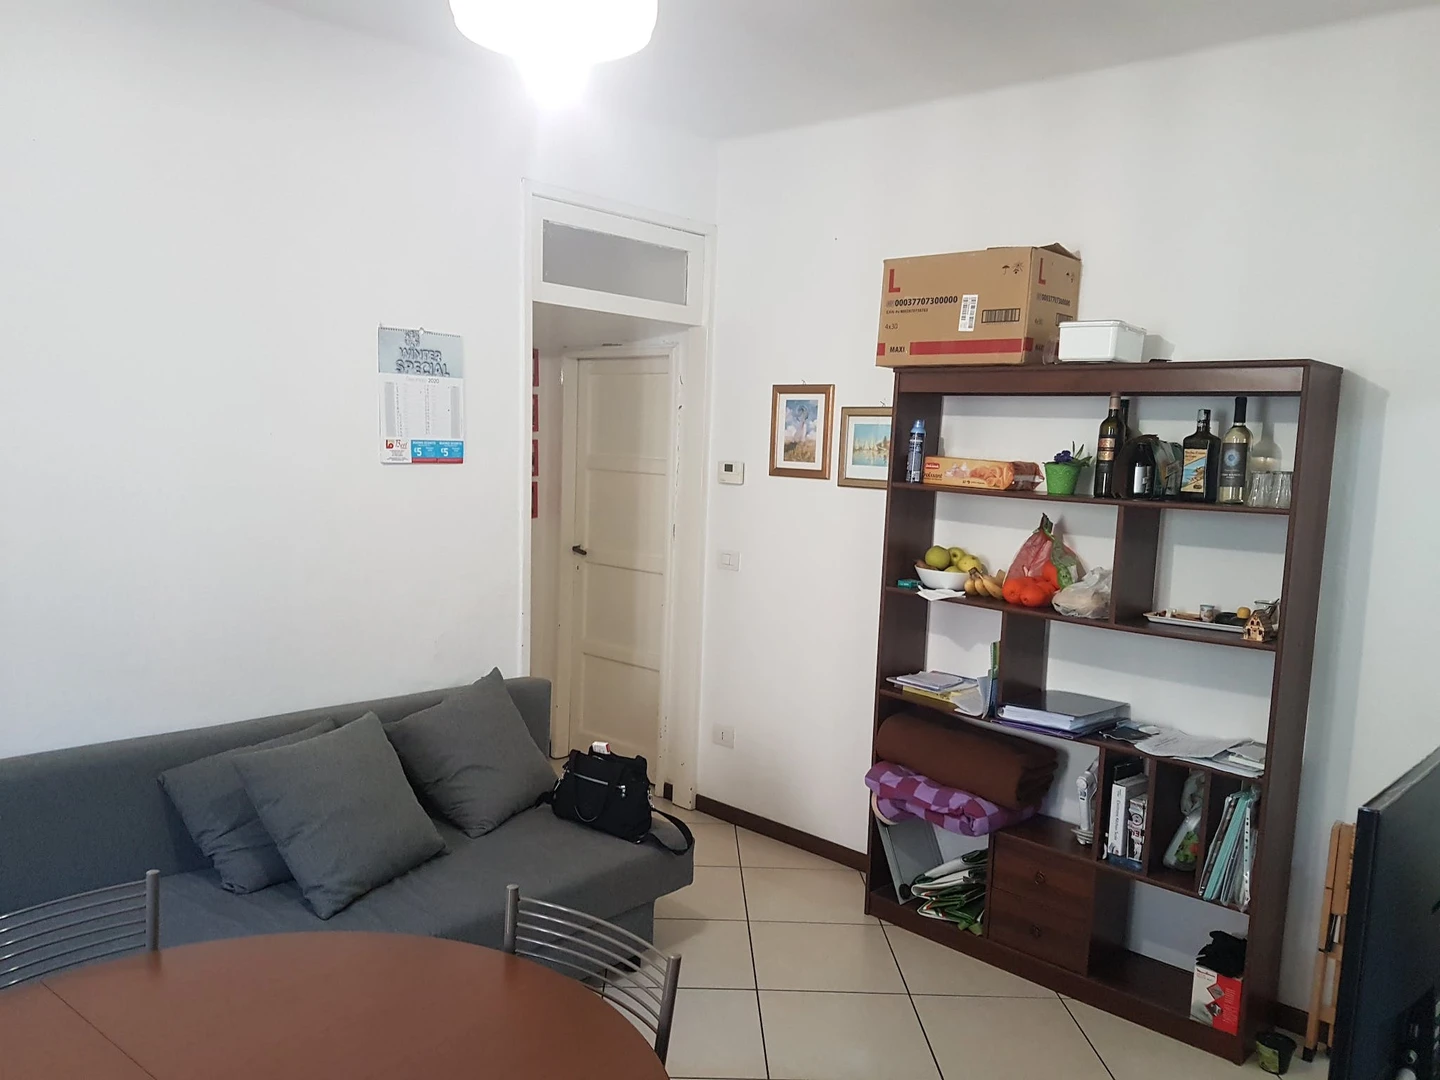 Room for rent in a shared flat in Forlì